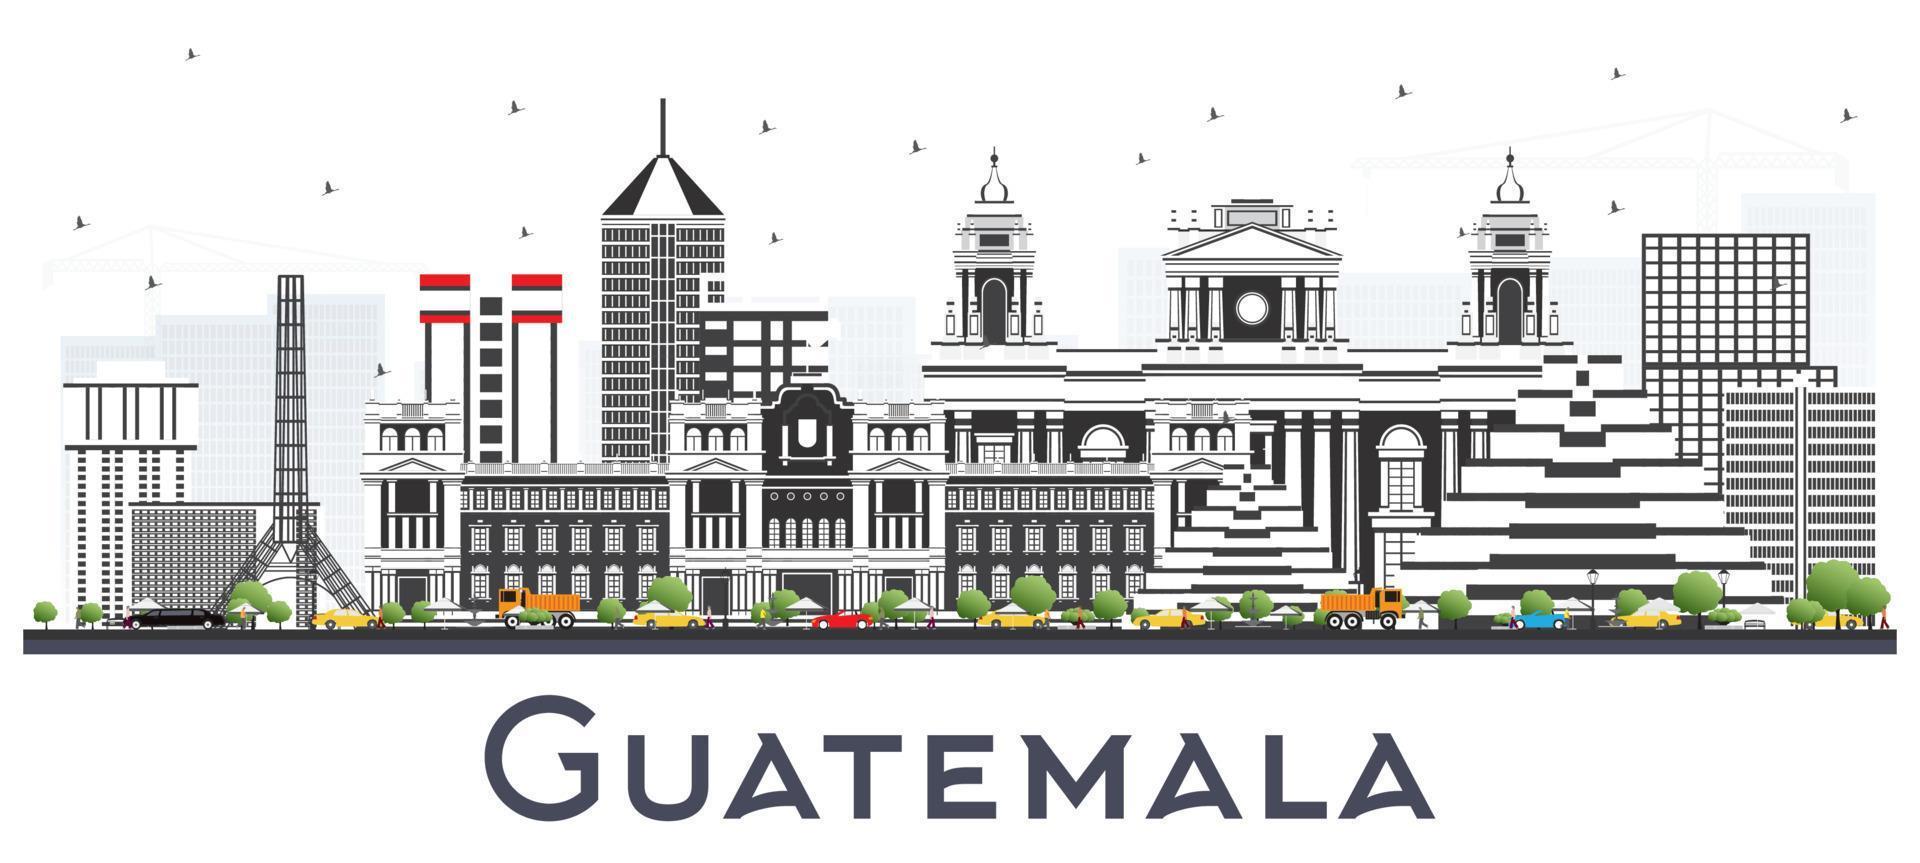 Guatemala City Skyline with Gray Buildings Isolated on White. vector